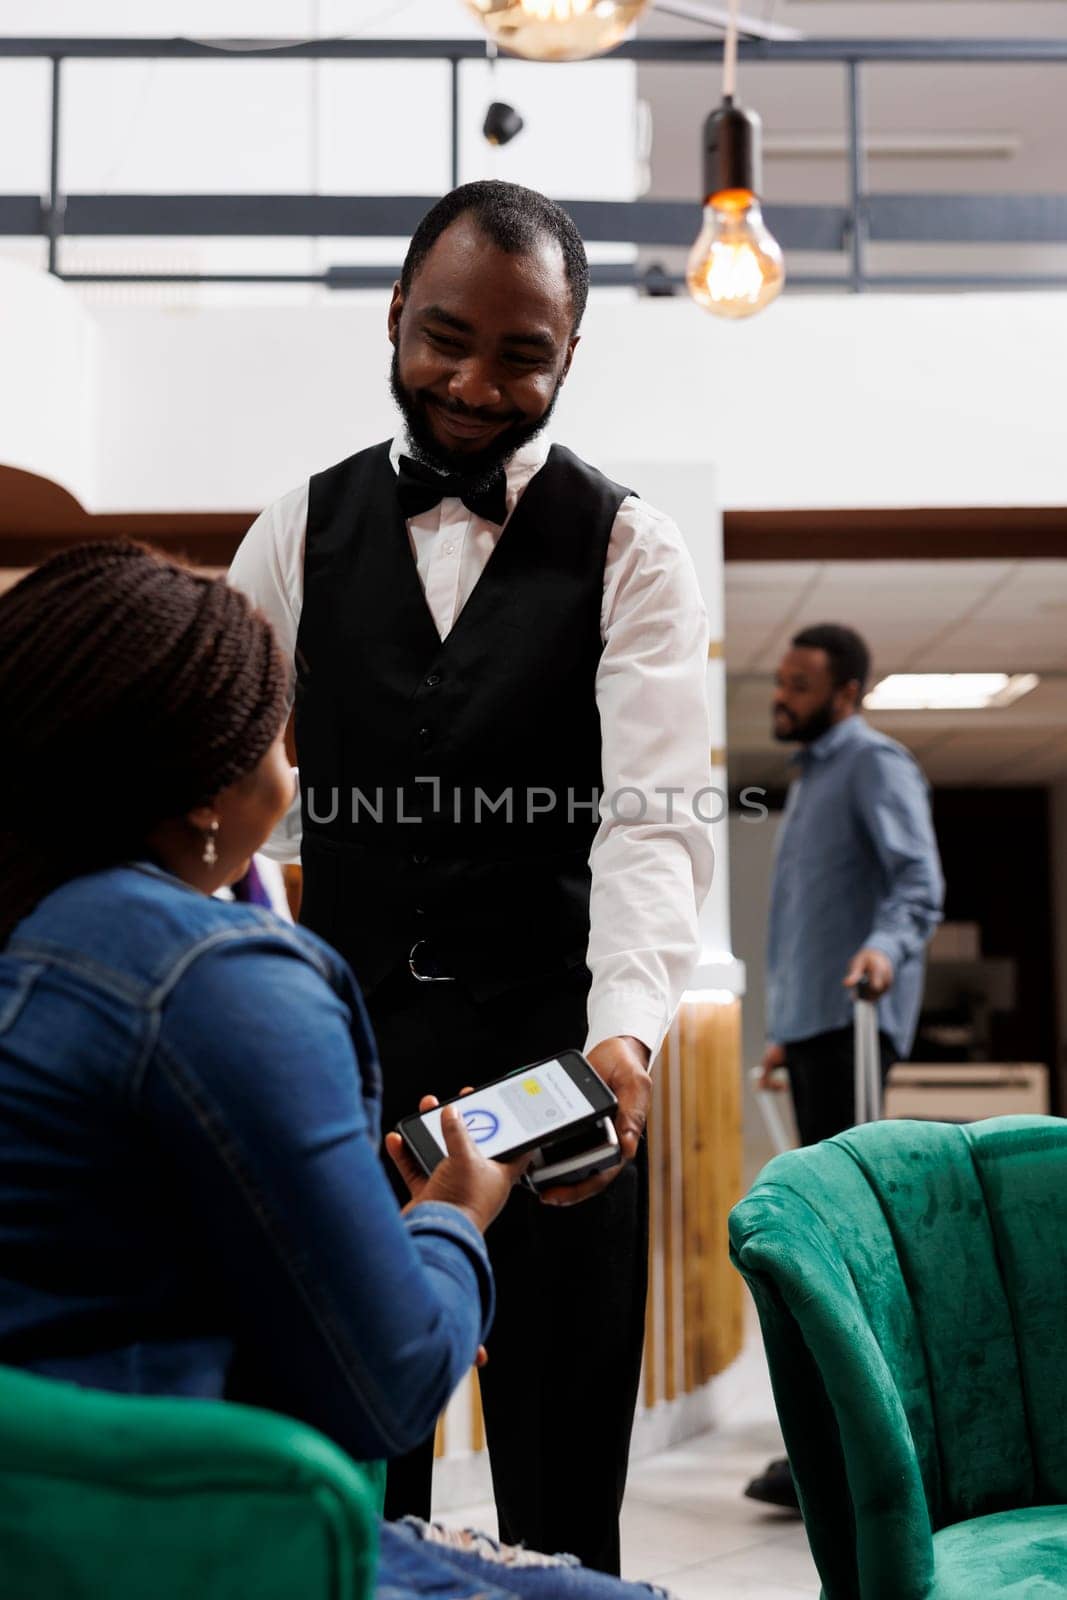 Smiling African American man waiter giving pos machine to female hotel guest sitting in lobby. Tourist holding smartphone paying for order while waiting for check-in procedure at lounge area